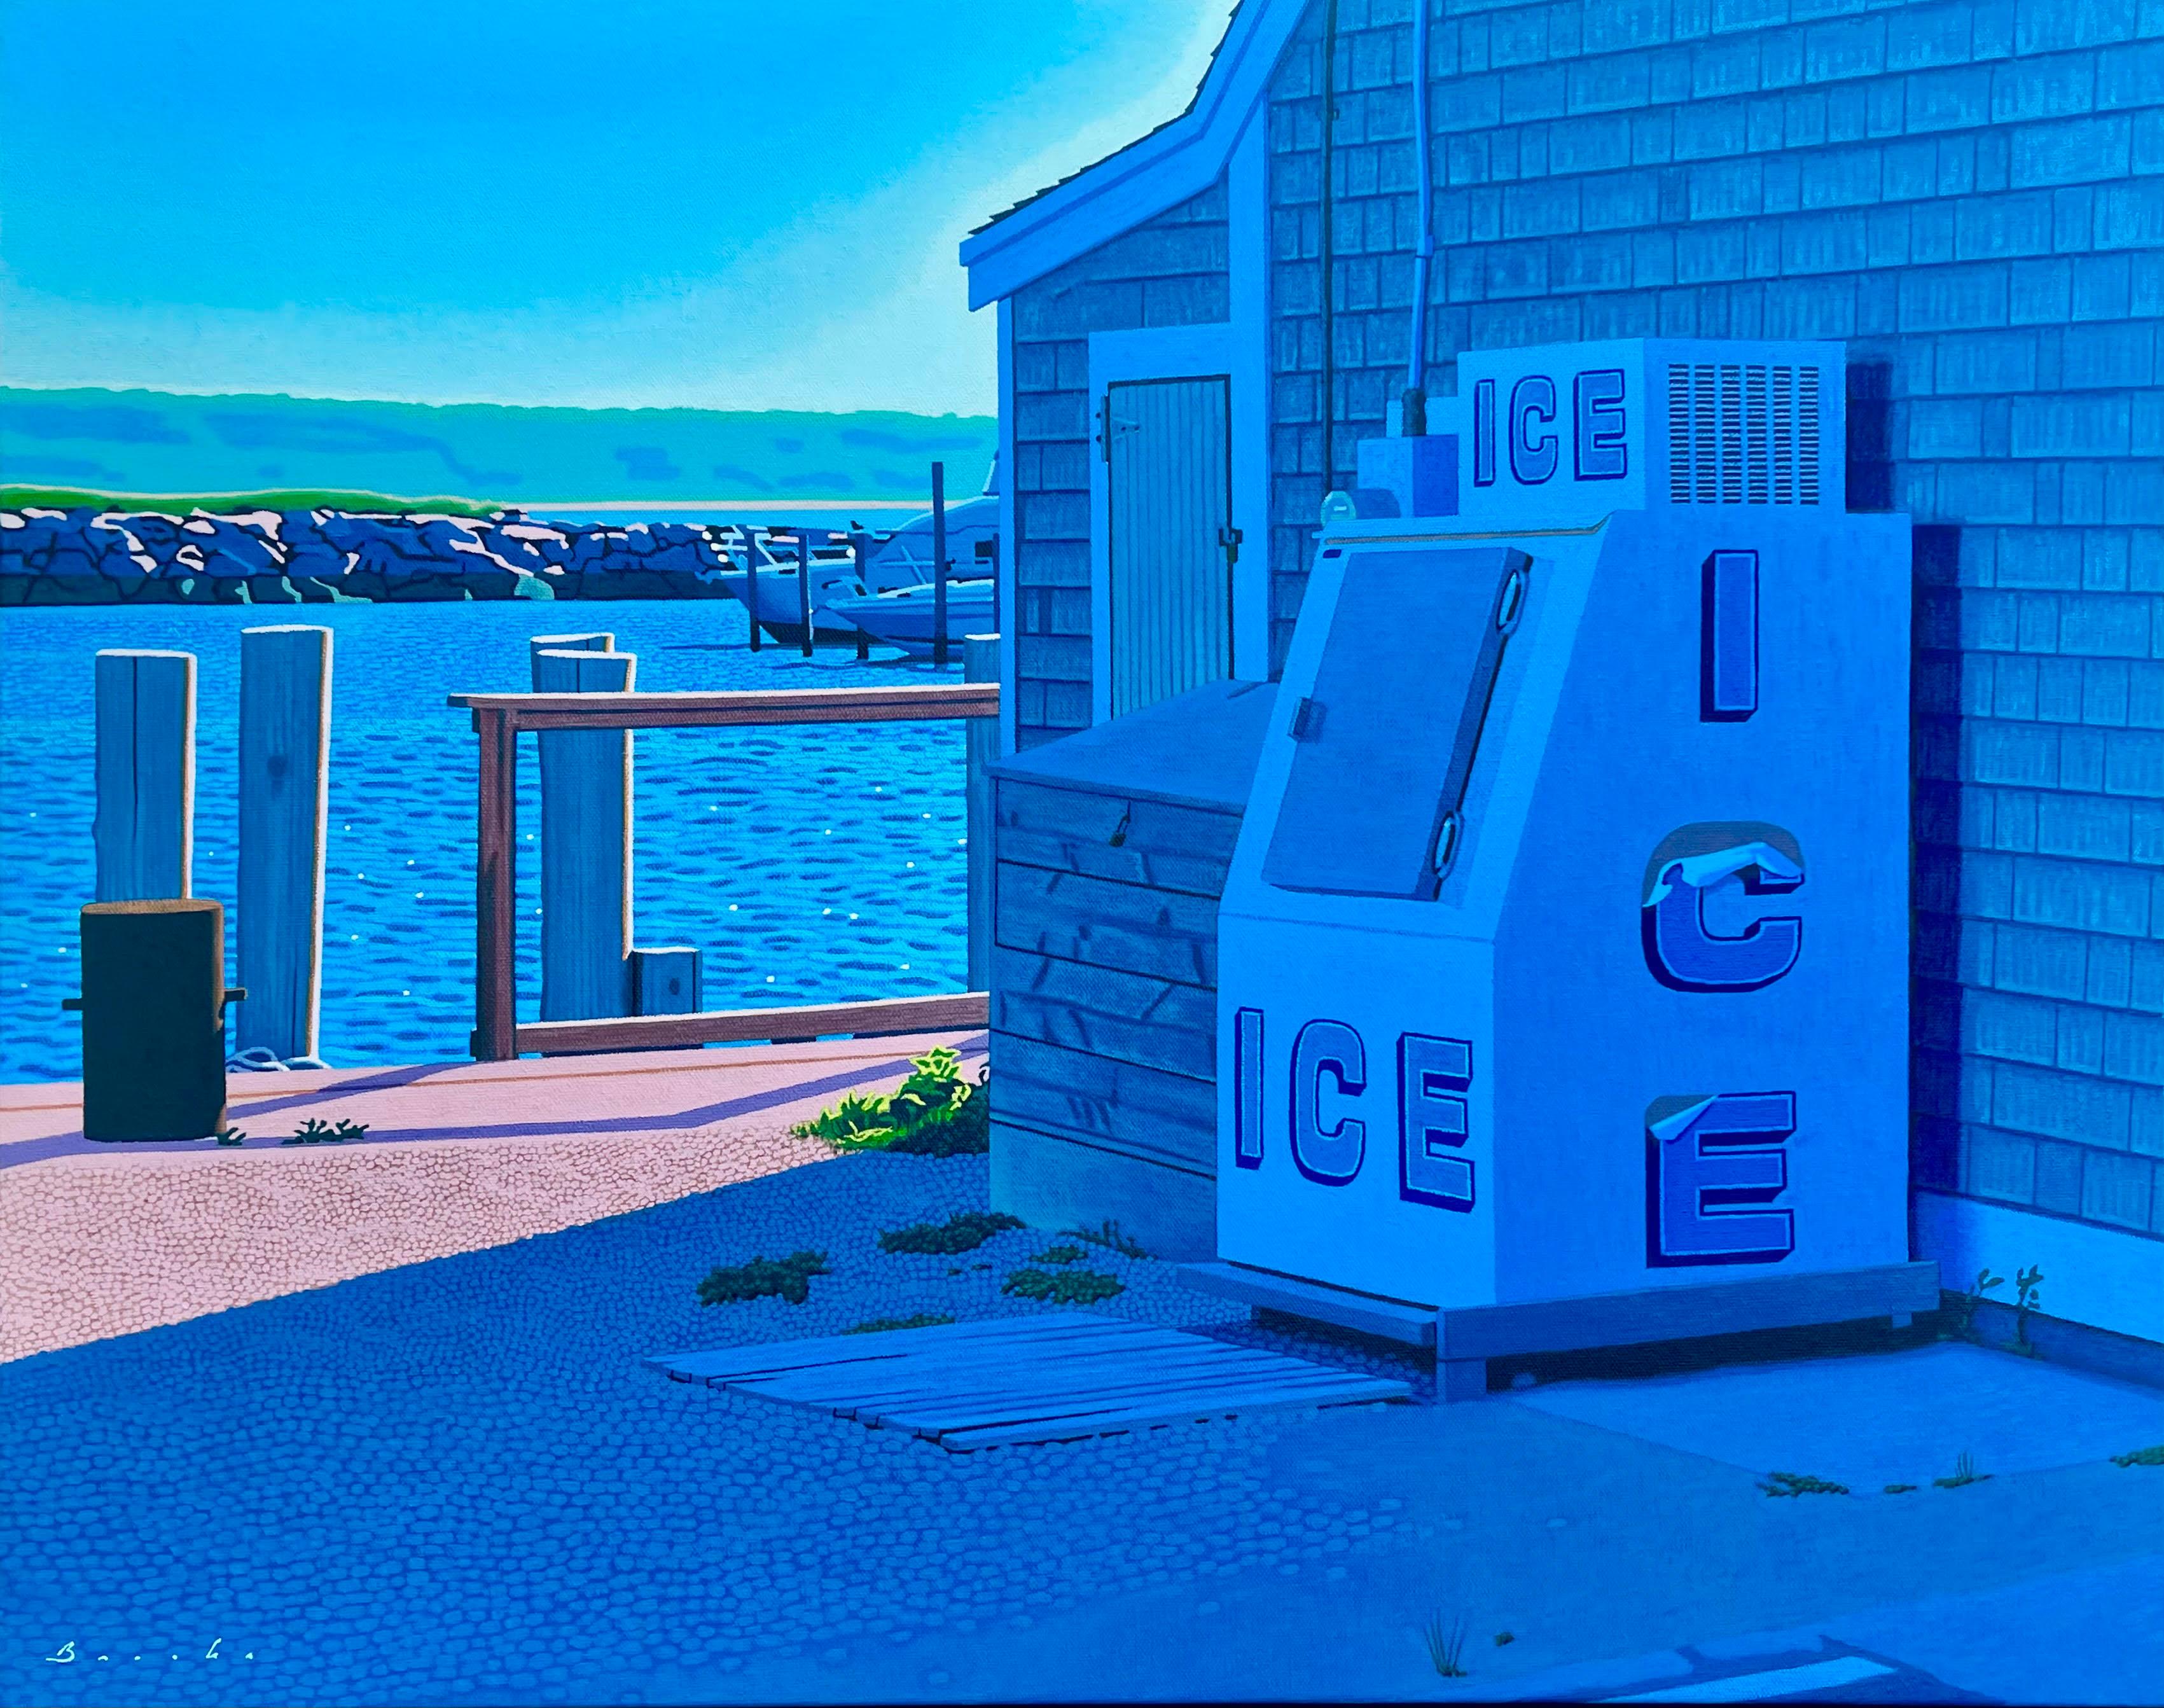 Rob Brooks Still-Life Painting - "Ice Bin" oil painting of and old-fashion Ice bin with docks & jetty in back